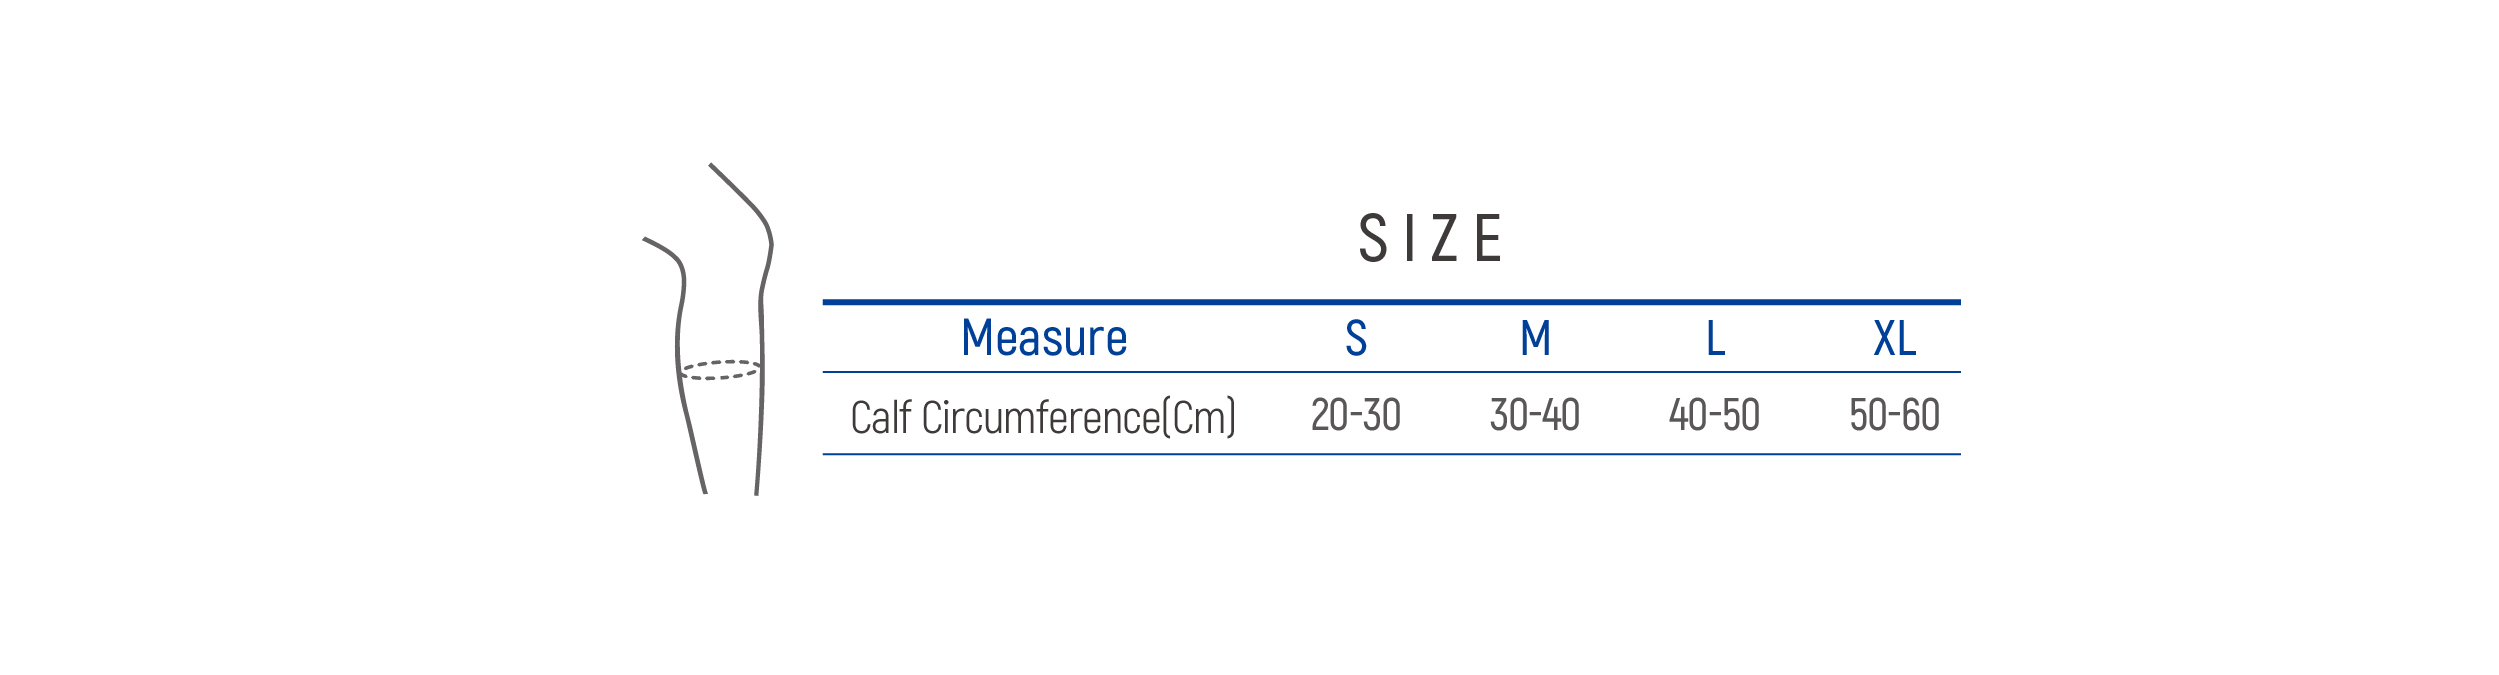 DR-K029 Size table image